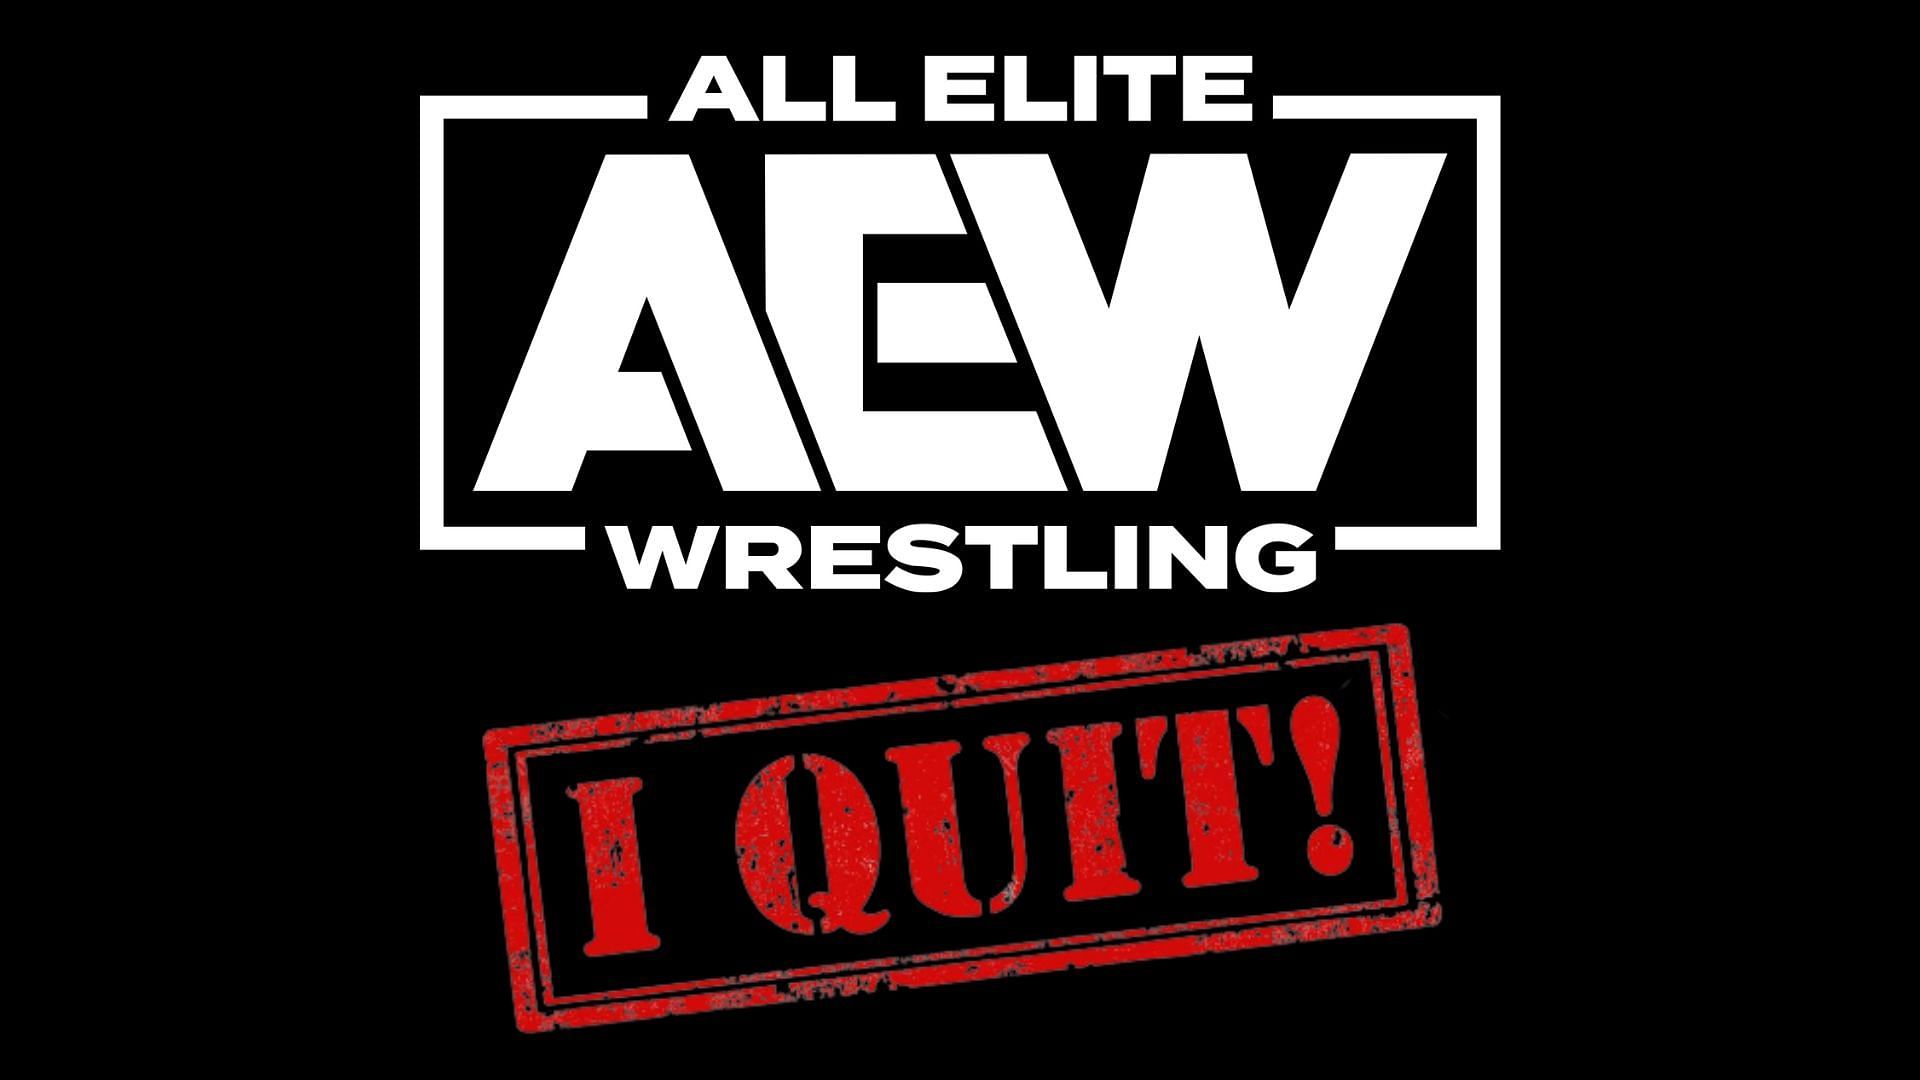 Has this star parted ways with AEW?